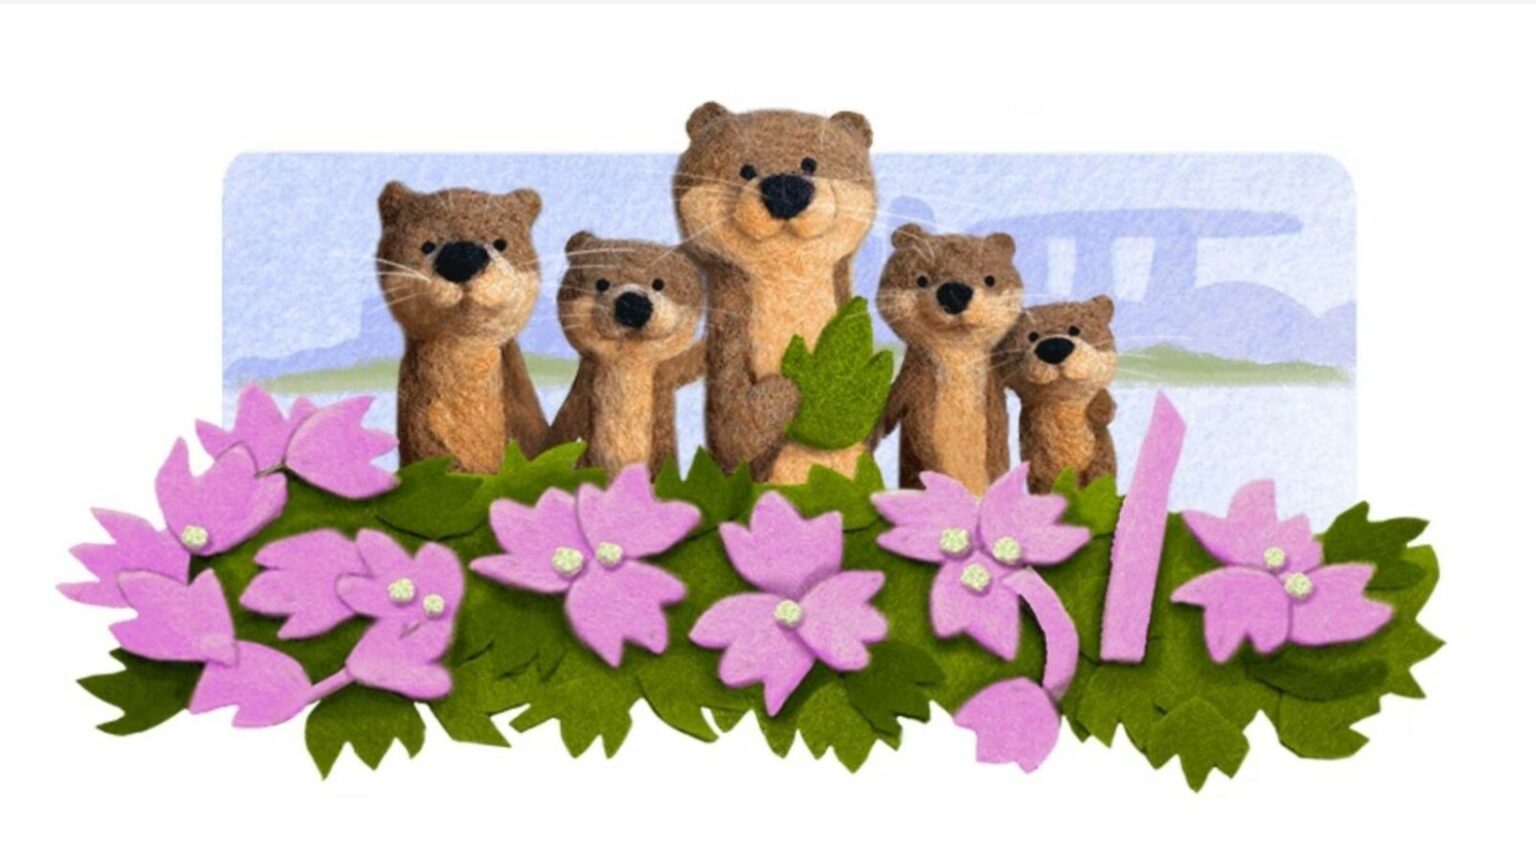 Singapore's Favorite Otters Celebrated in Google Doodle